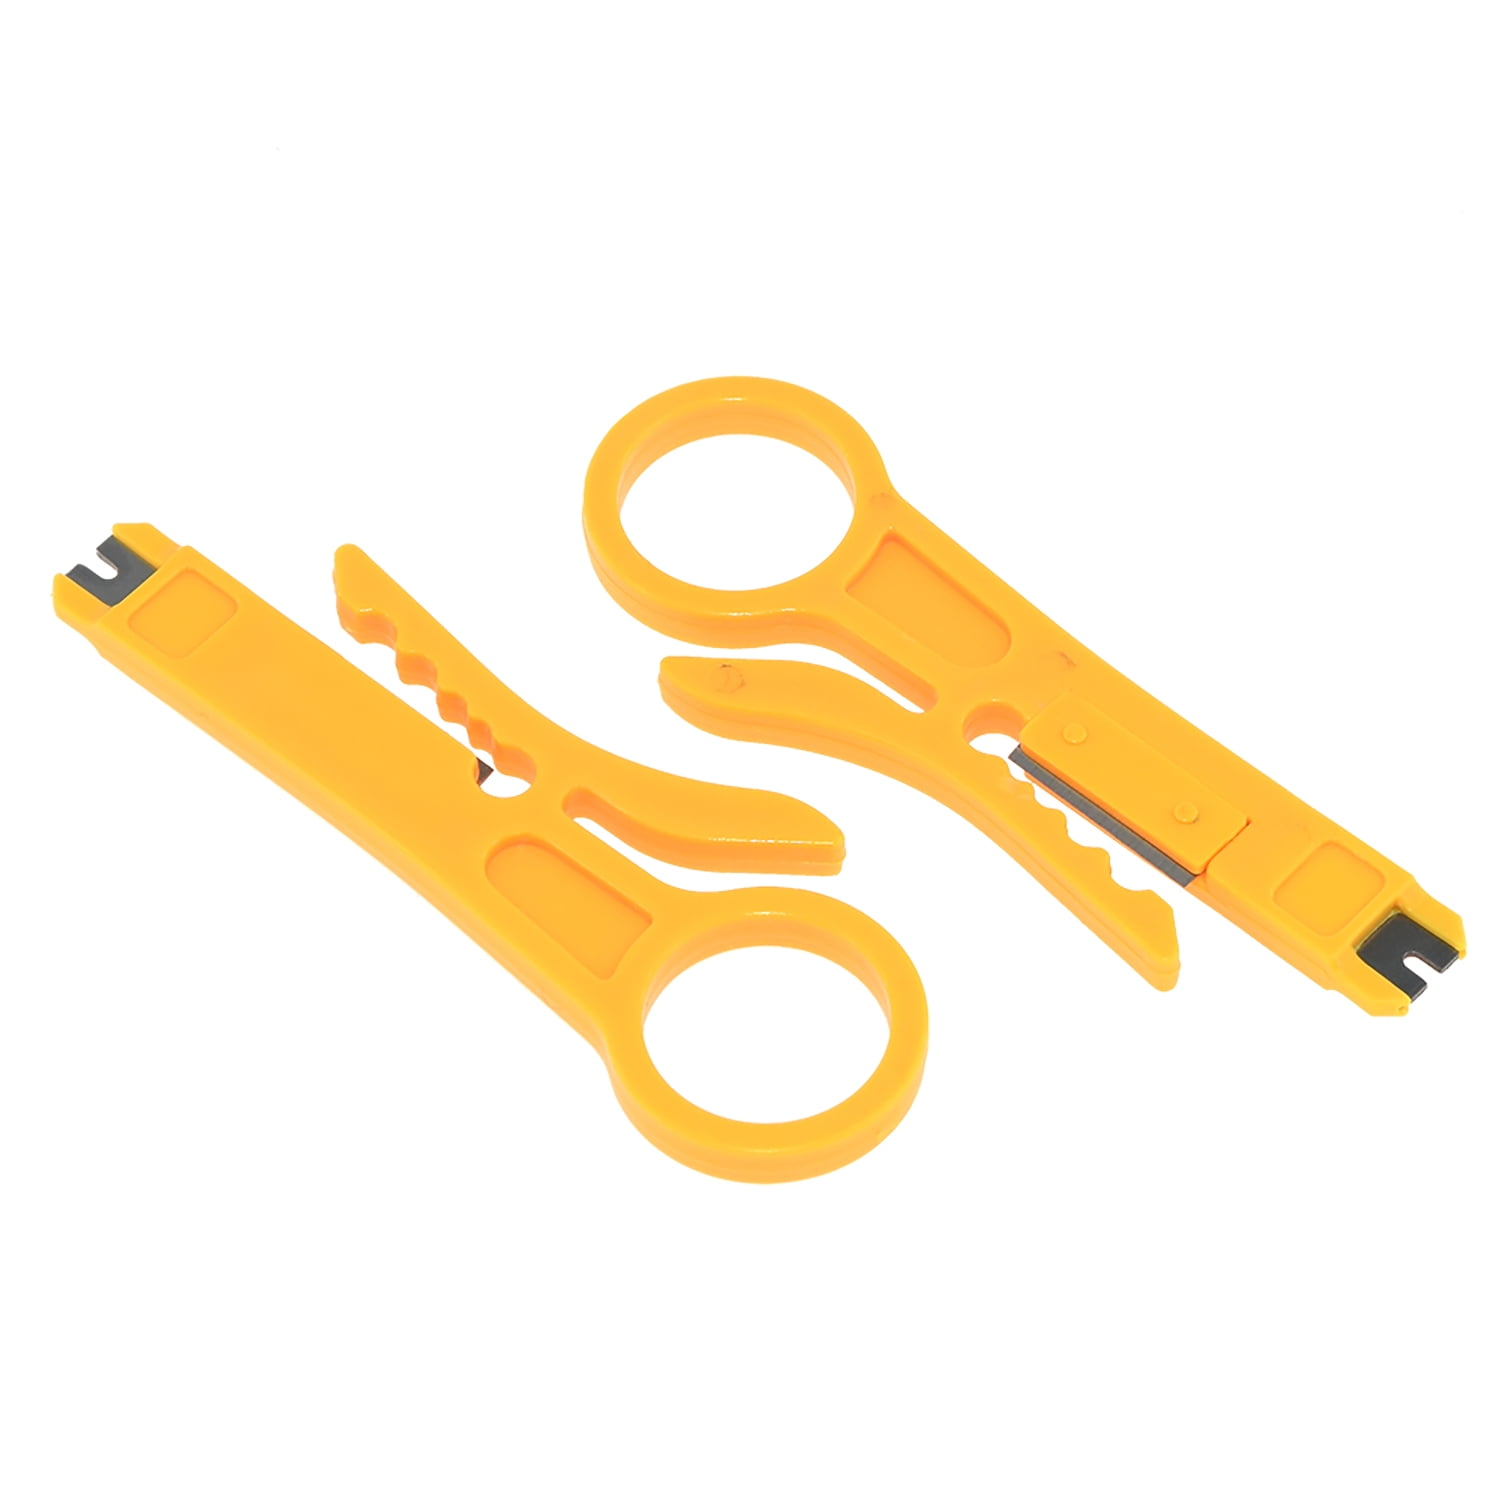 Practical Mini Wire Cutter Blade Small Yellow Wire Stripper Stripping Cutter CO 